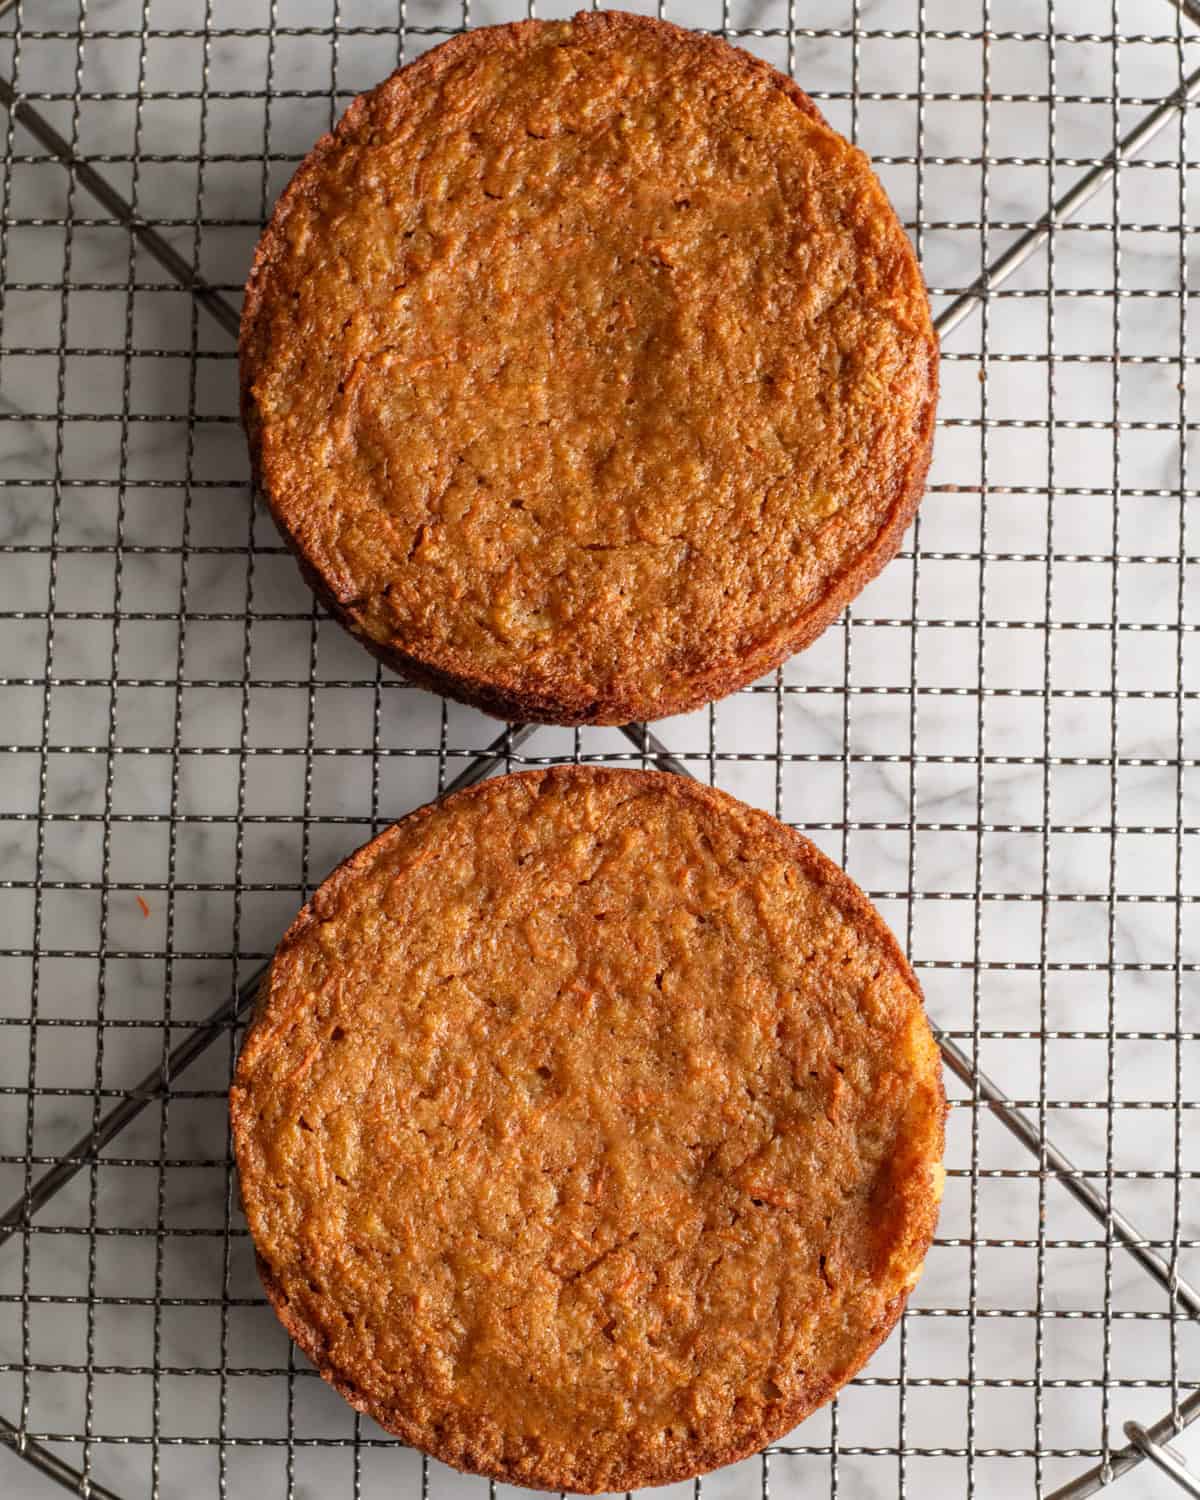 two Gluten-Free Carrot Cake rounds on a wire cooling rack after baking